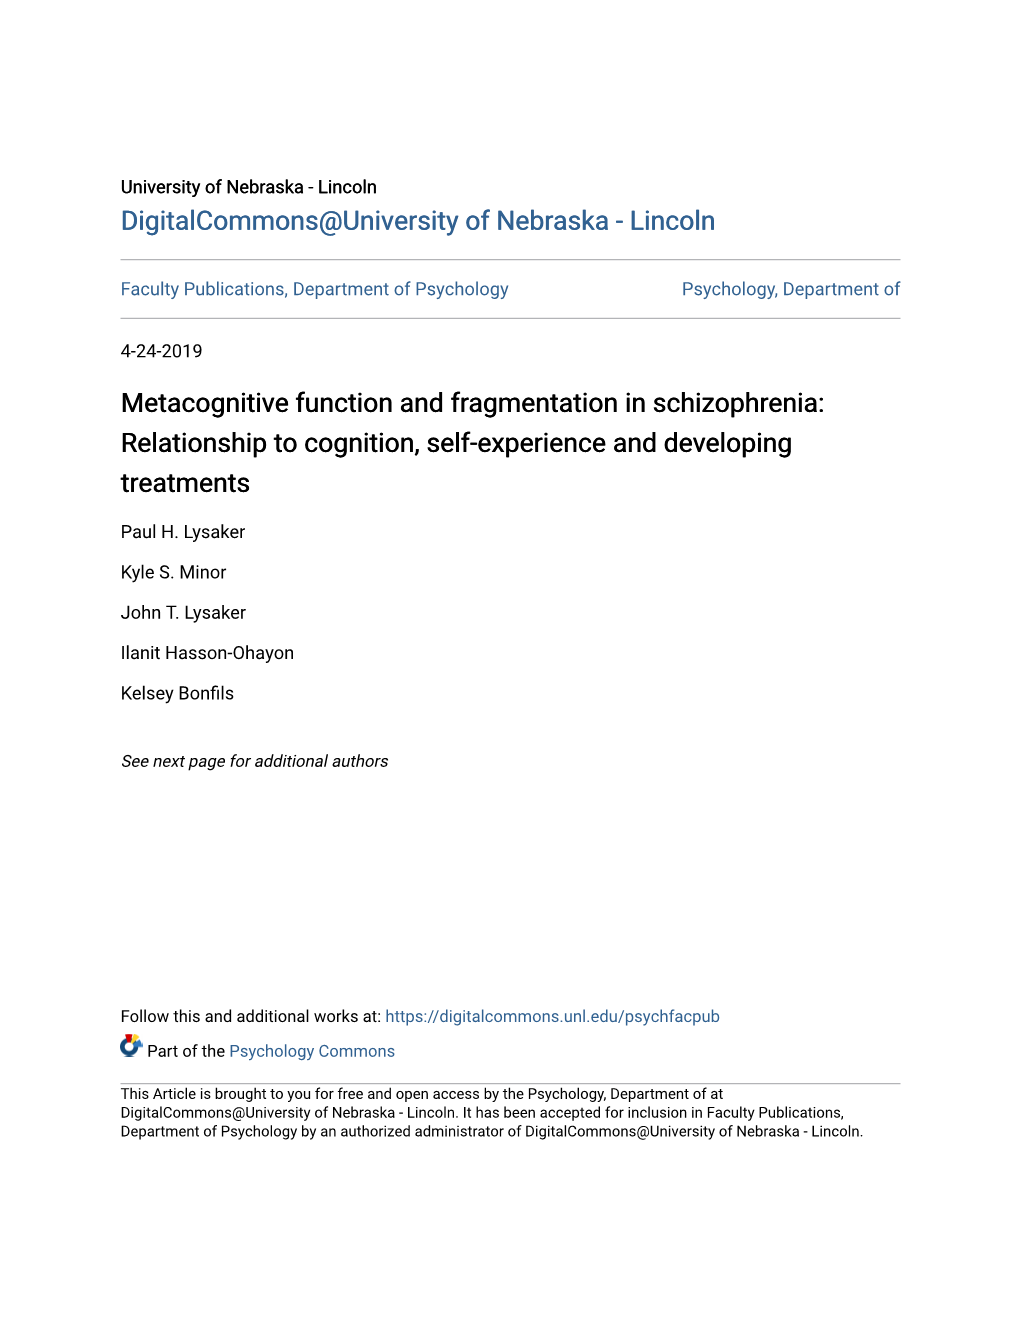 Metacognitive Function and Fragmentation in Schizophrenia: Relationship to Cognition, Self-Experience and Developing Treatments